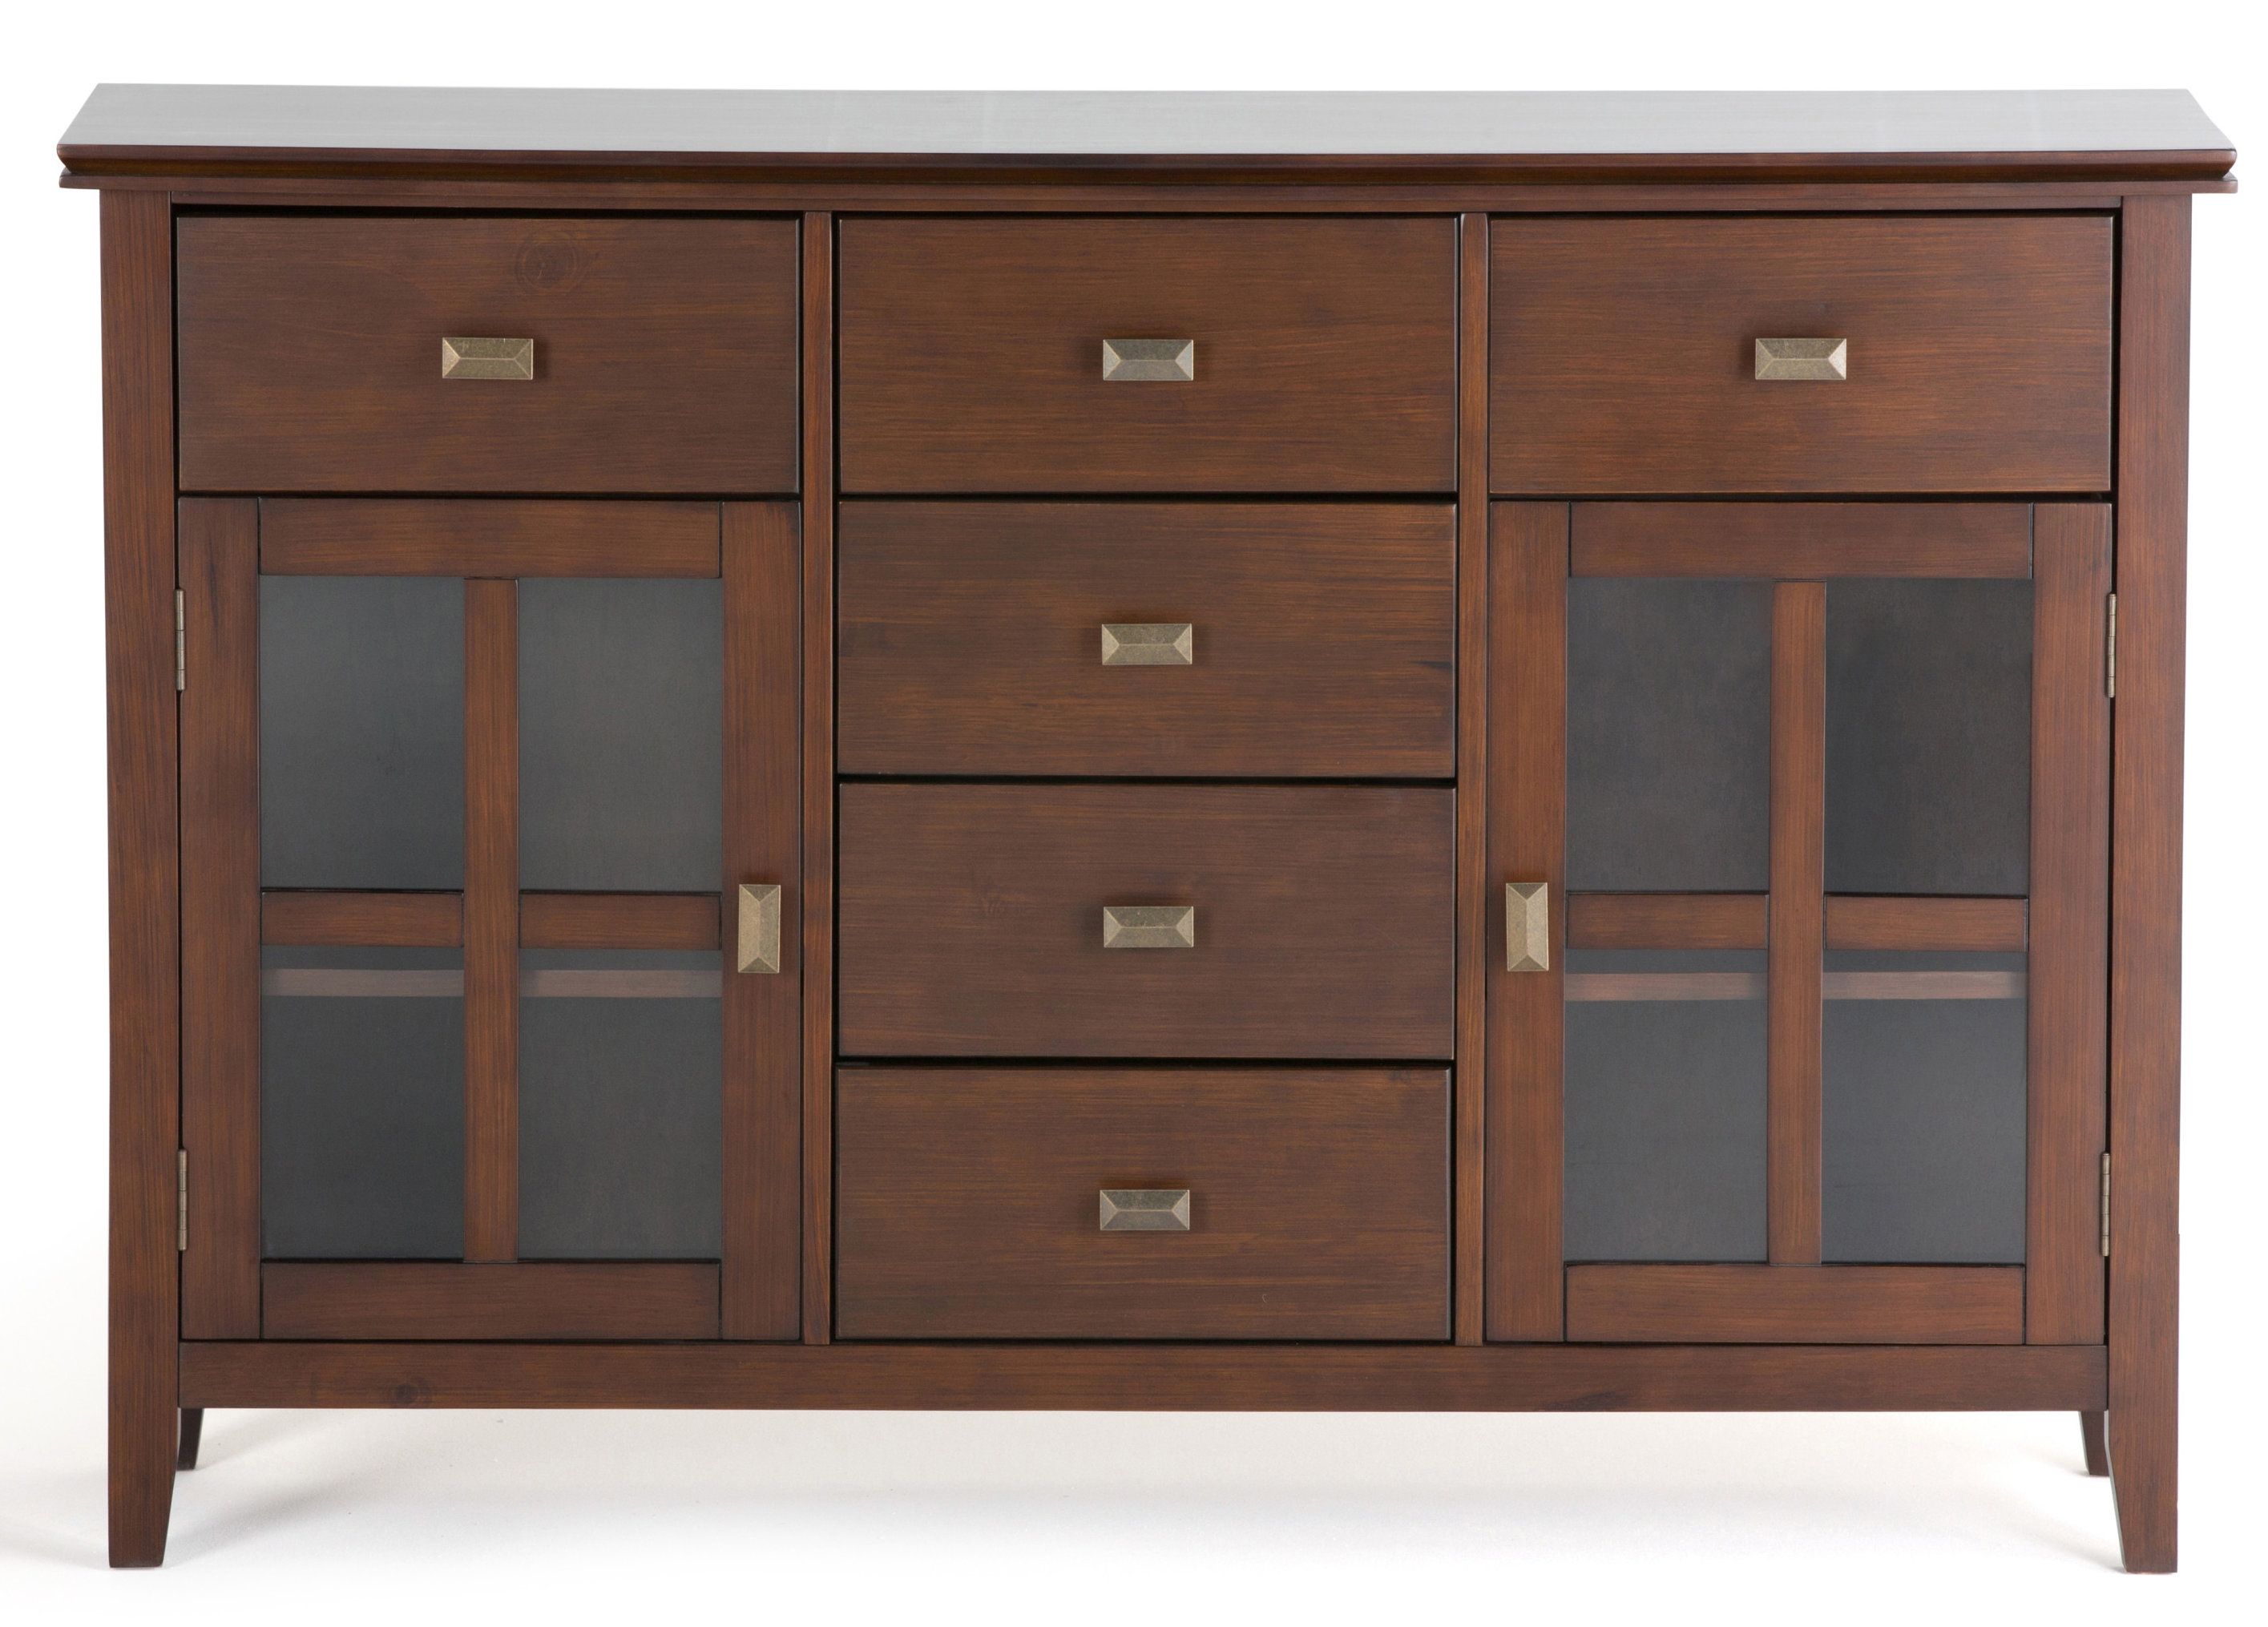 Artisan Sideboard Intended For Most Recent Lanesboro Sideboards (View 16 of 20)